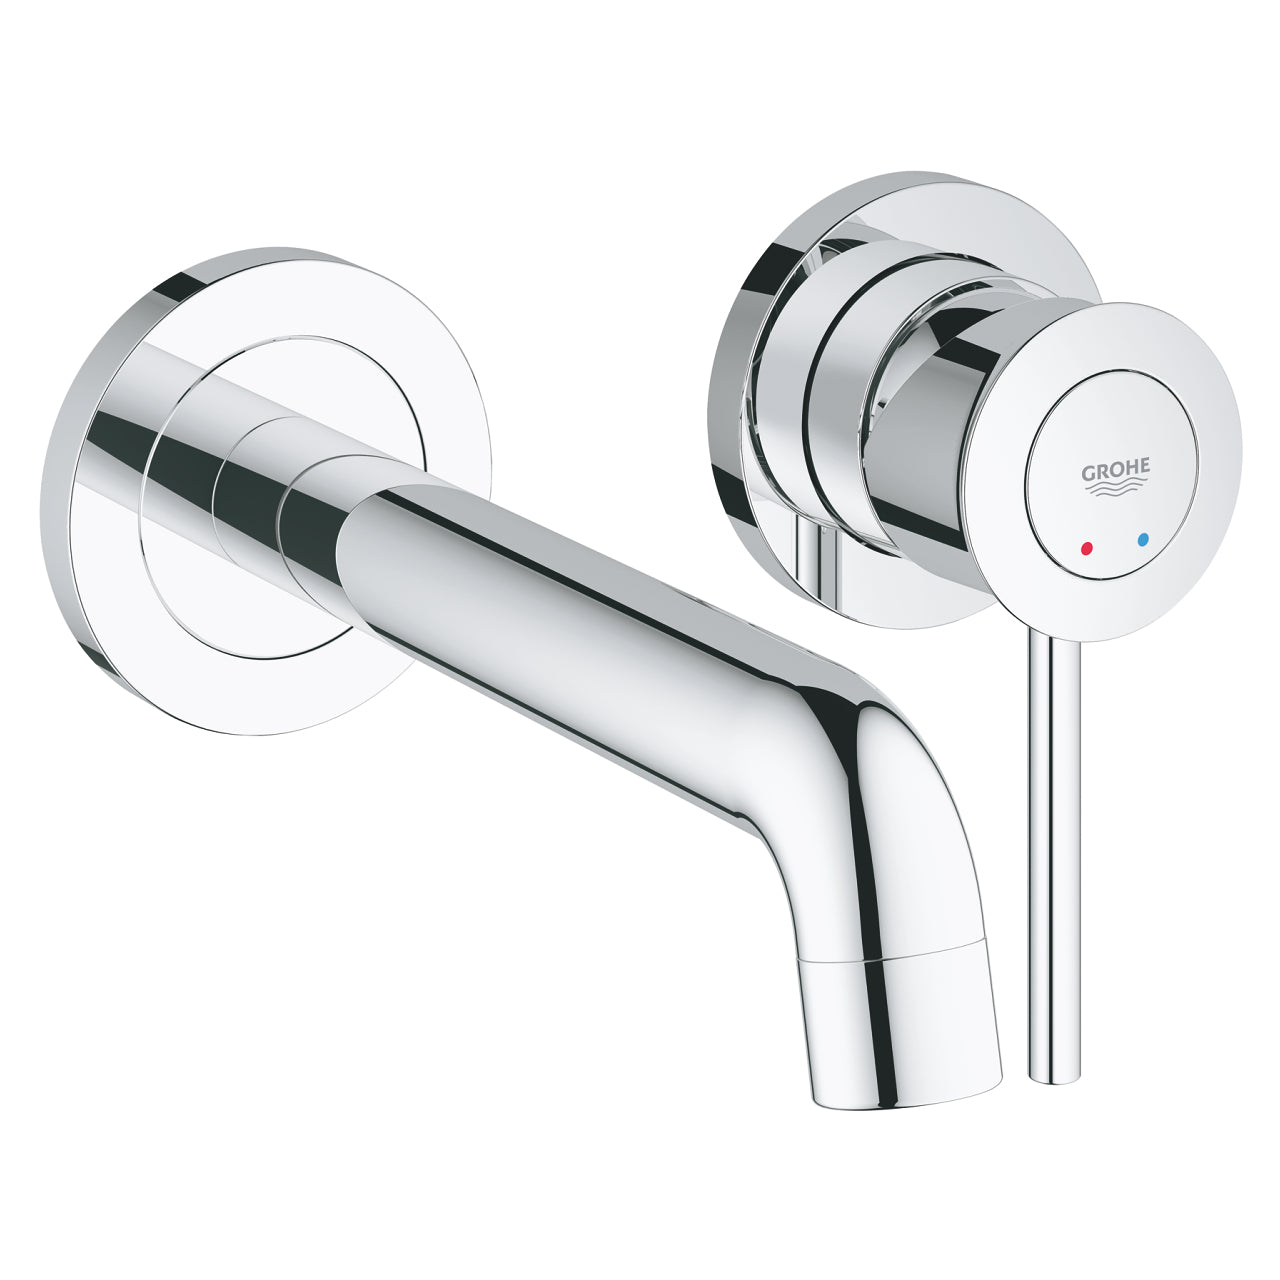 Grohe Bauclassic Two Hole Basin Mixer